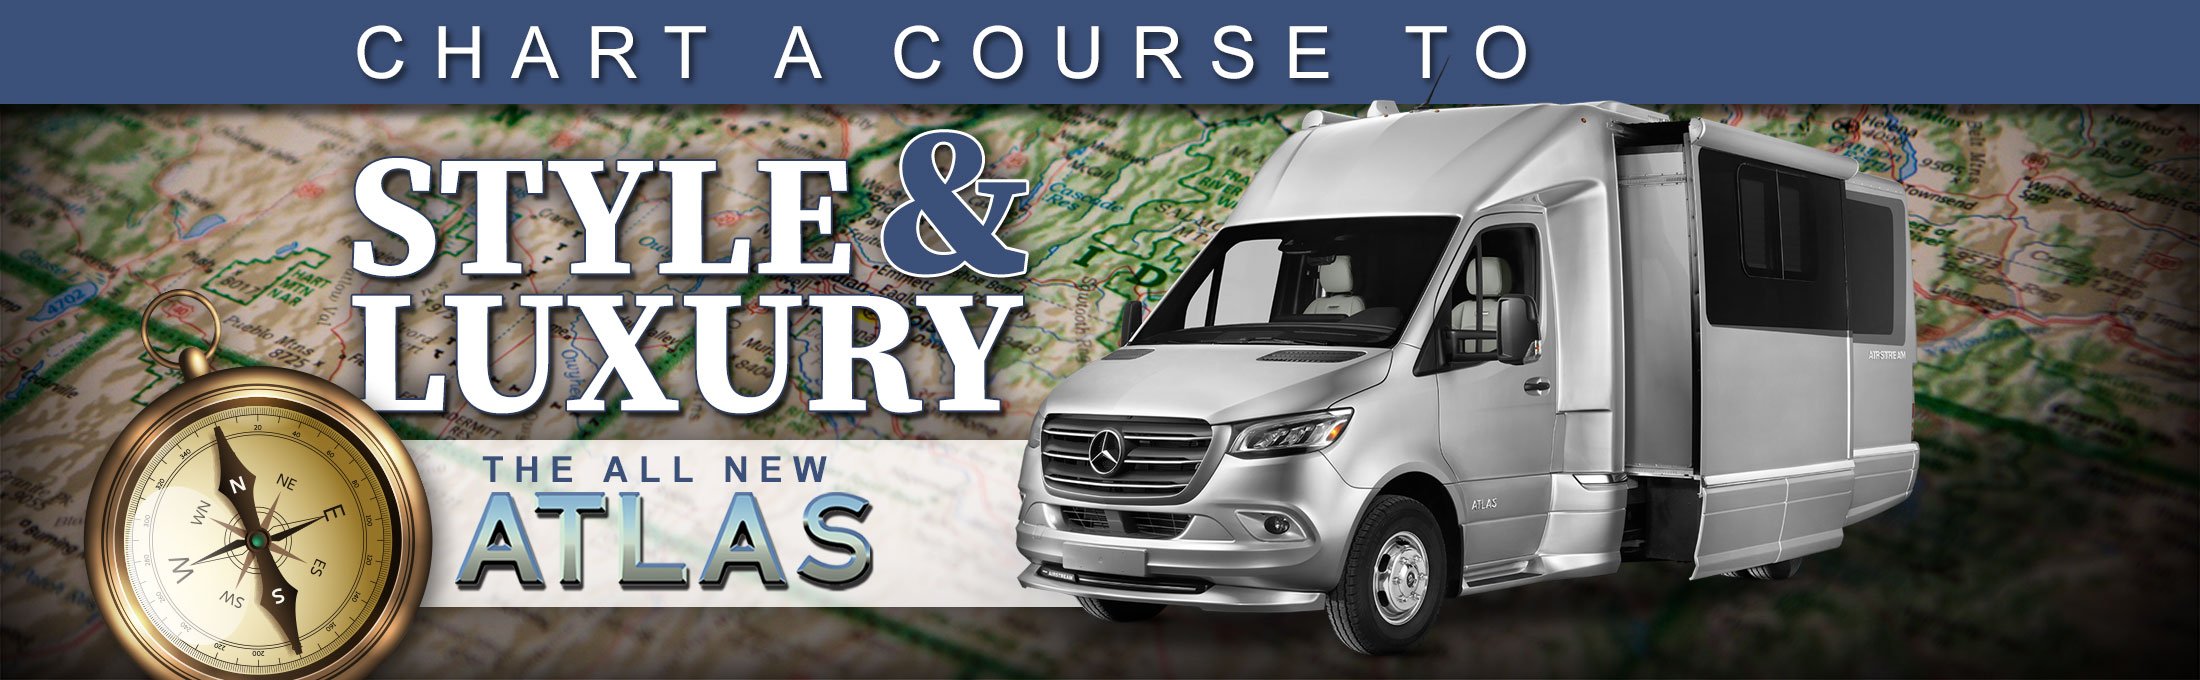 Chart A Course To Style & Luxury: The All New Airstream Atlas